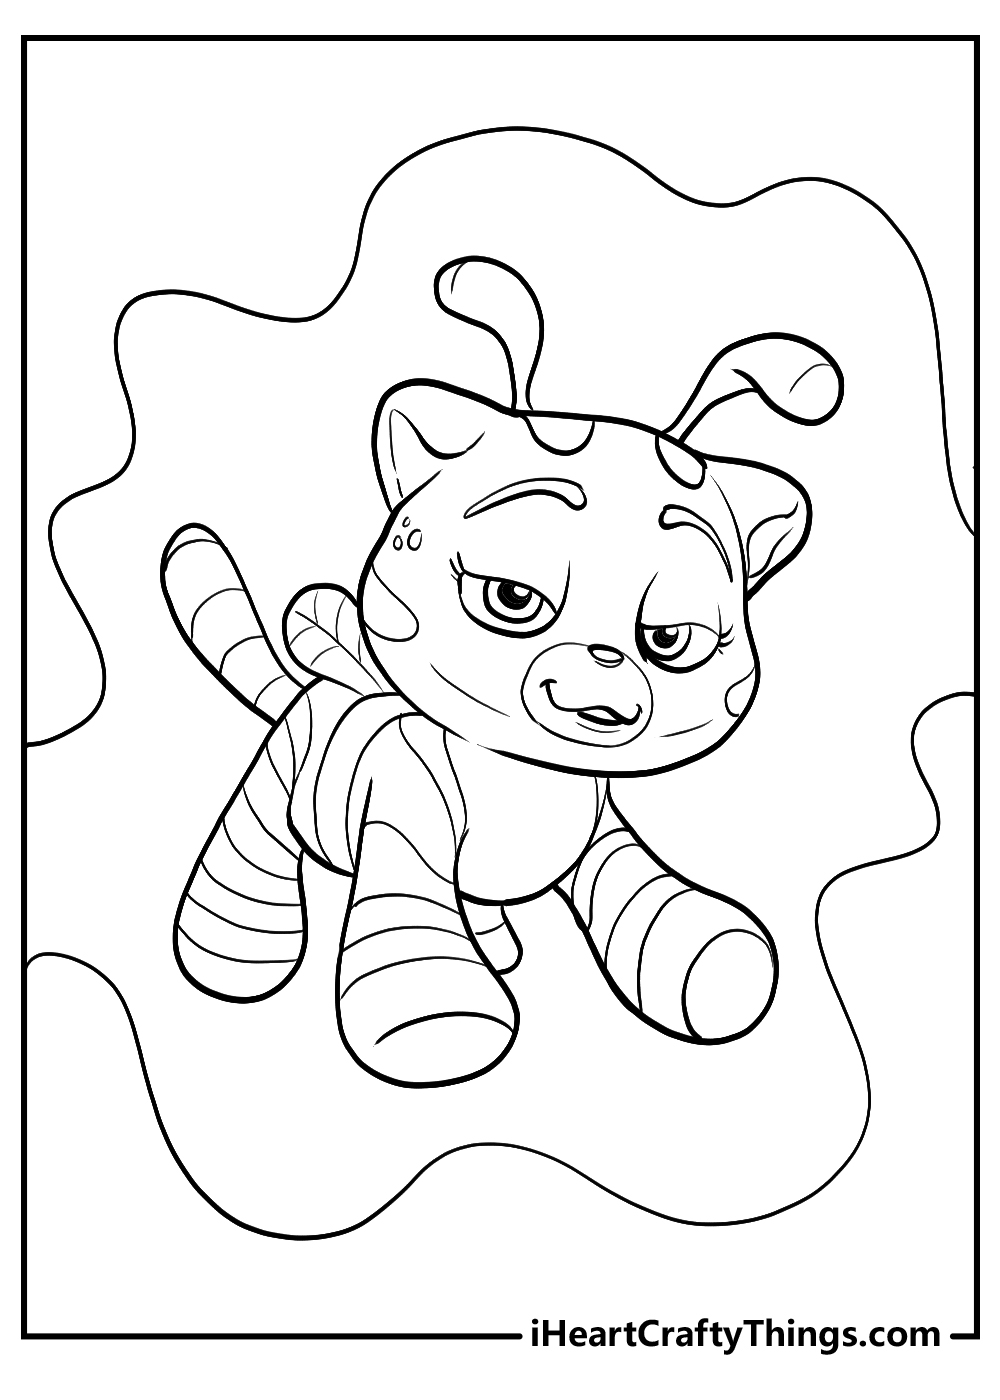 Cat-Bee coloring printable